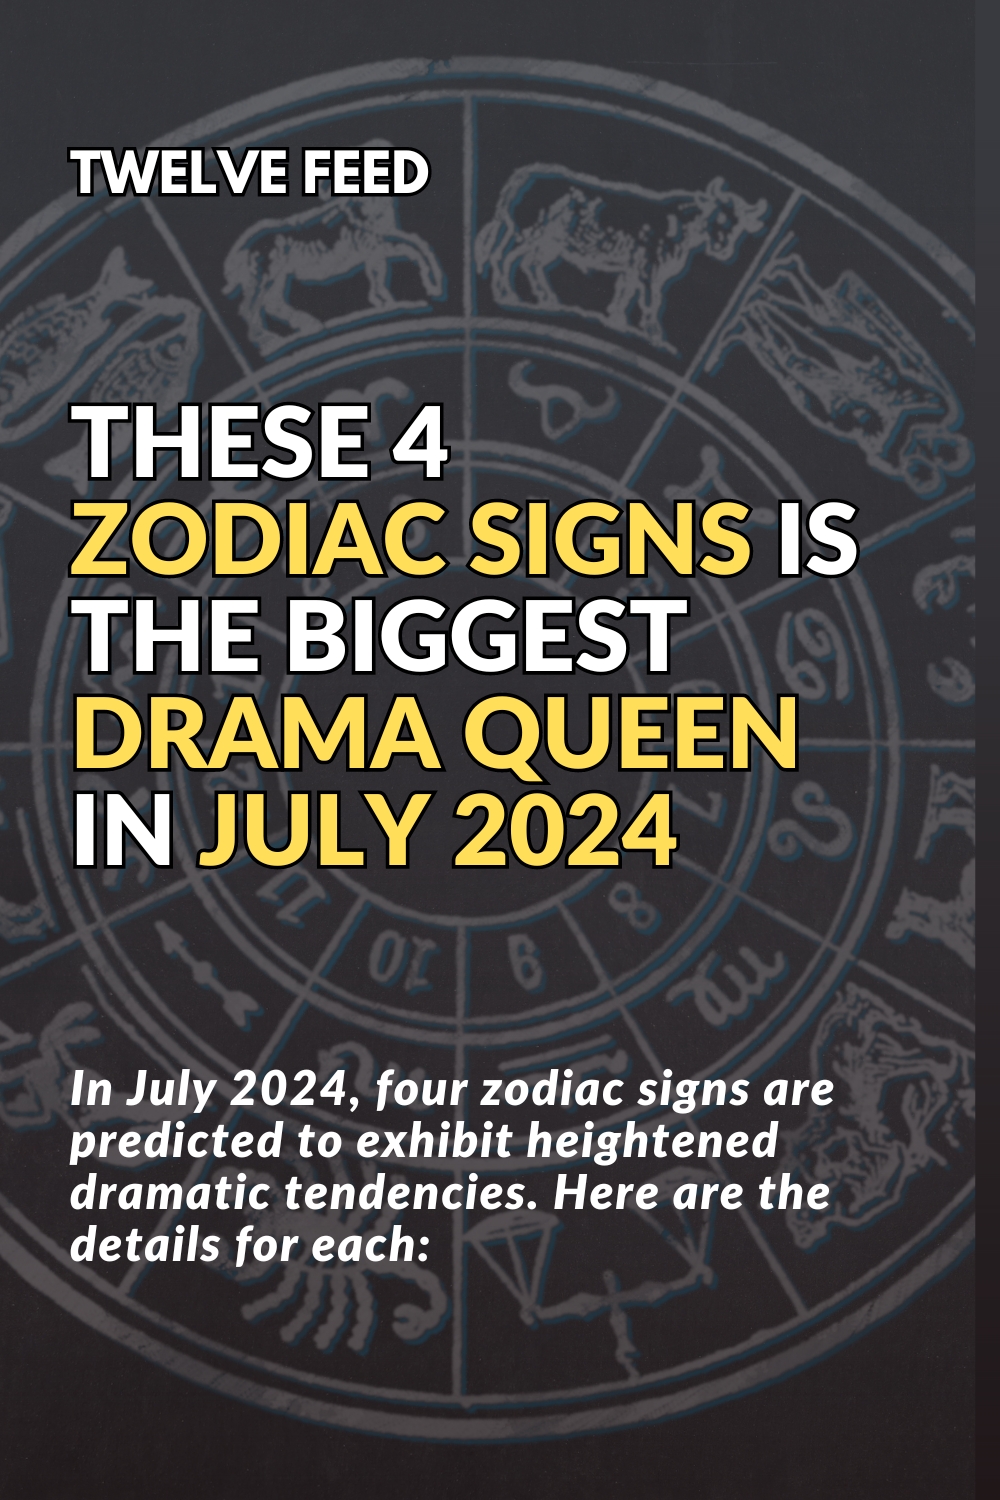 These 4 Zodiac Signs Is The Biggest Drama Queen In July 2024